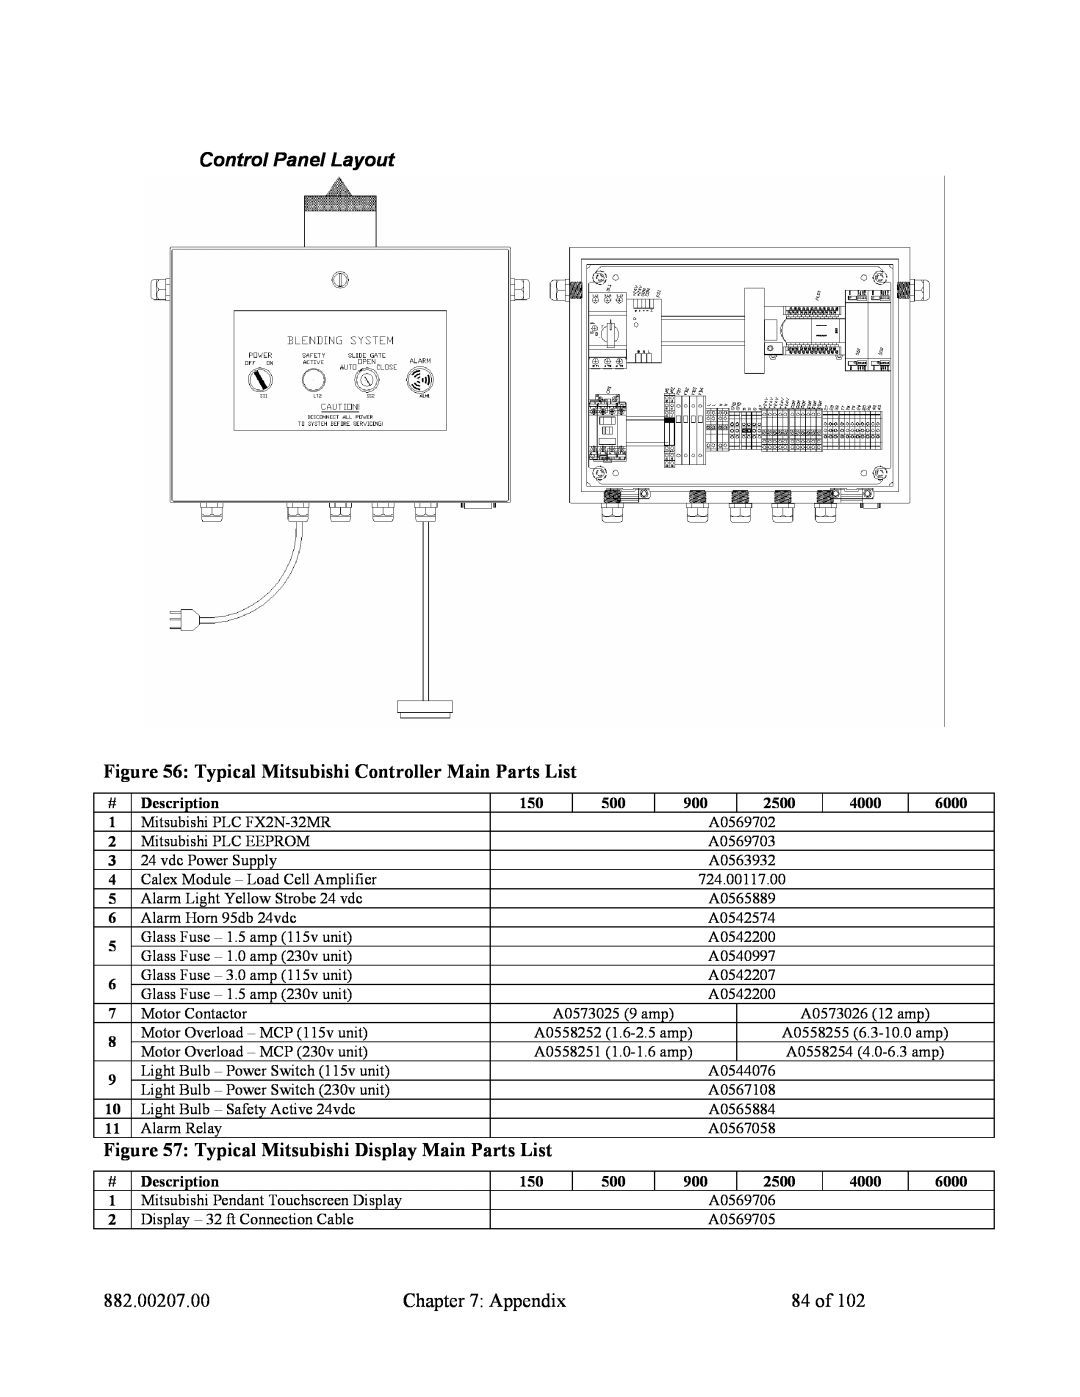 Mitsubishi Electronics 882.00207.00 specifications Control Panel Layout, Appendix, 84 of 